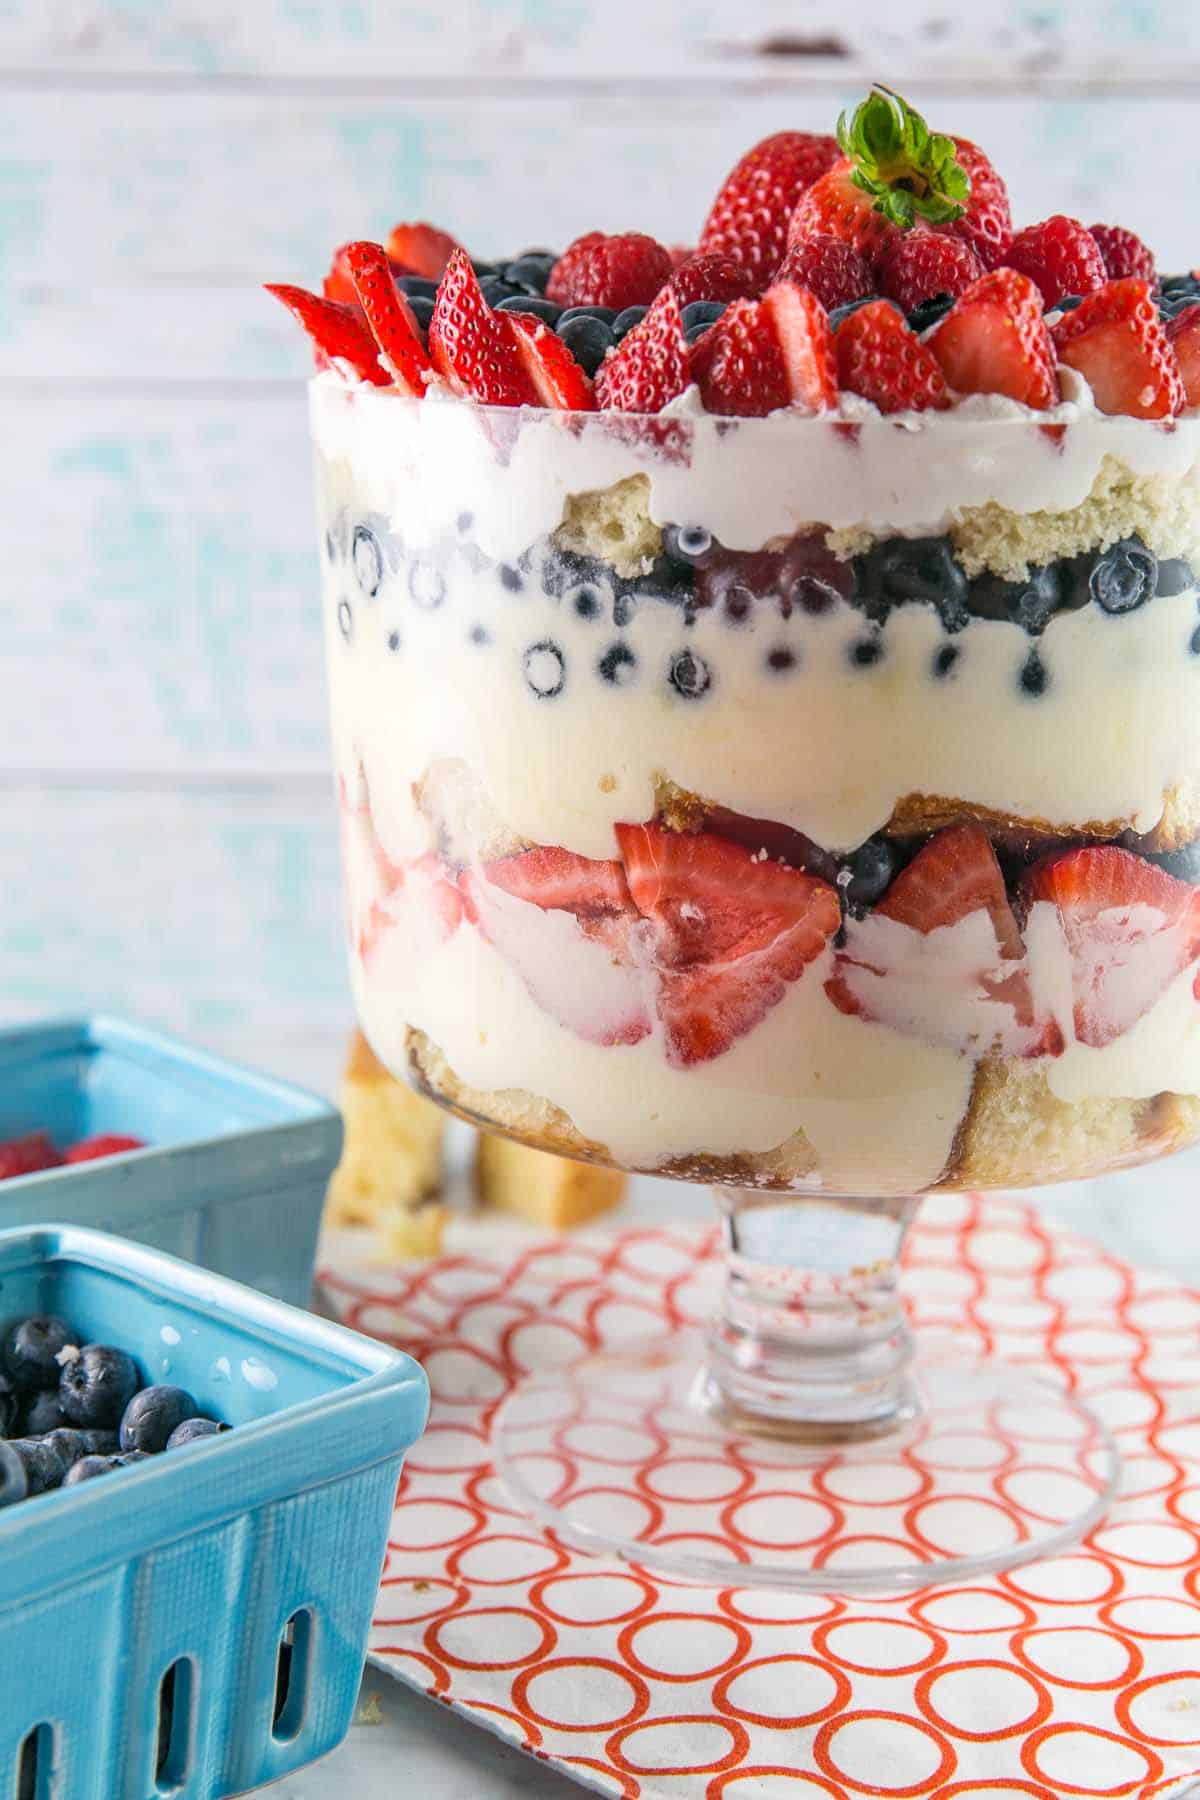 Summer Berry Trifle: Let berries shine in this easy, make ahead dessert perfect for summer entertaining. Homemade vanilla cake and lemon custard make it even better than store bought! {Bunsen Burner Bakery} #trifle #cake #berries #summerdesserts